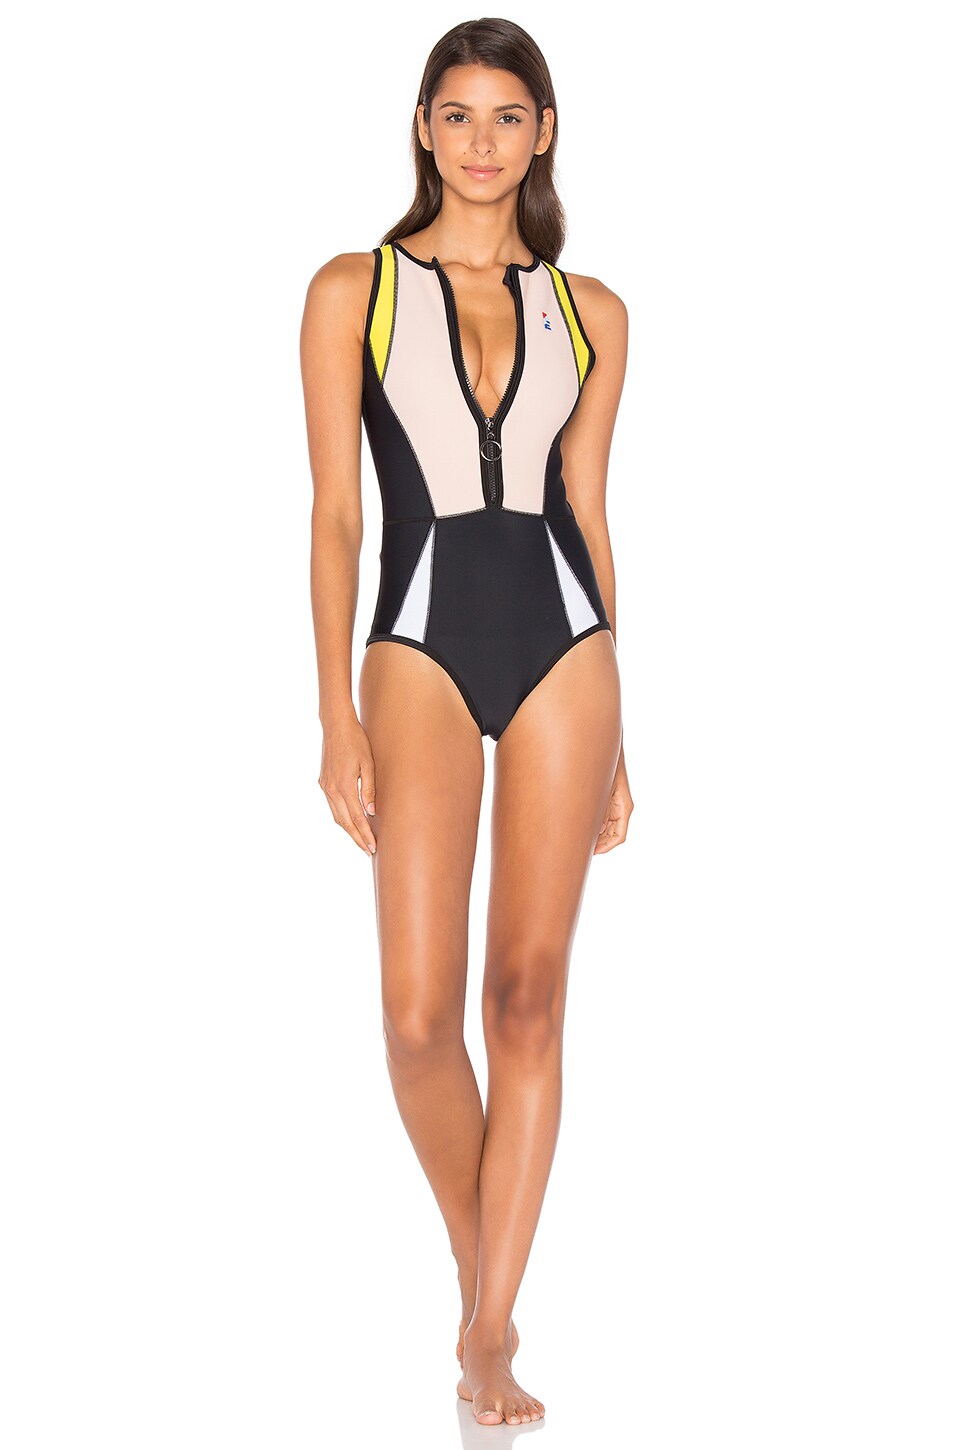 Share G-Force Wetsuit in Black & Nude on Twitter (opens in a new window...